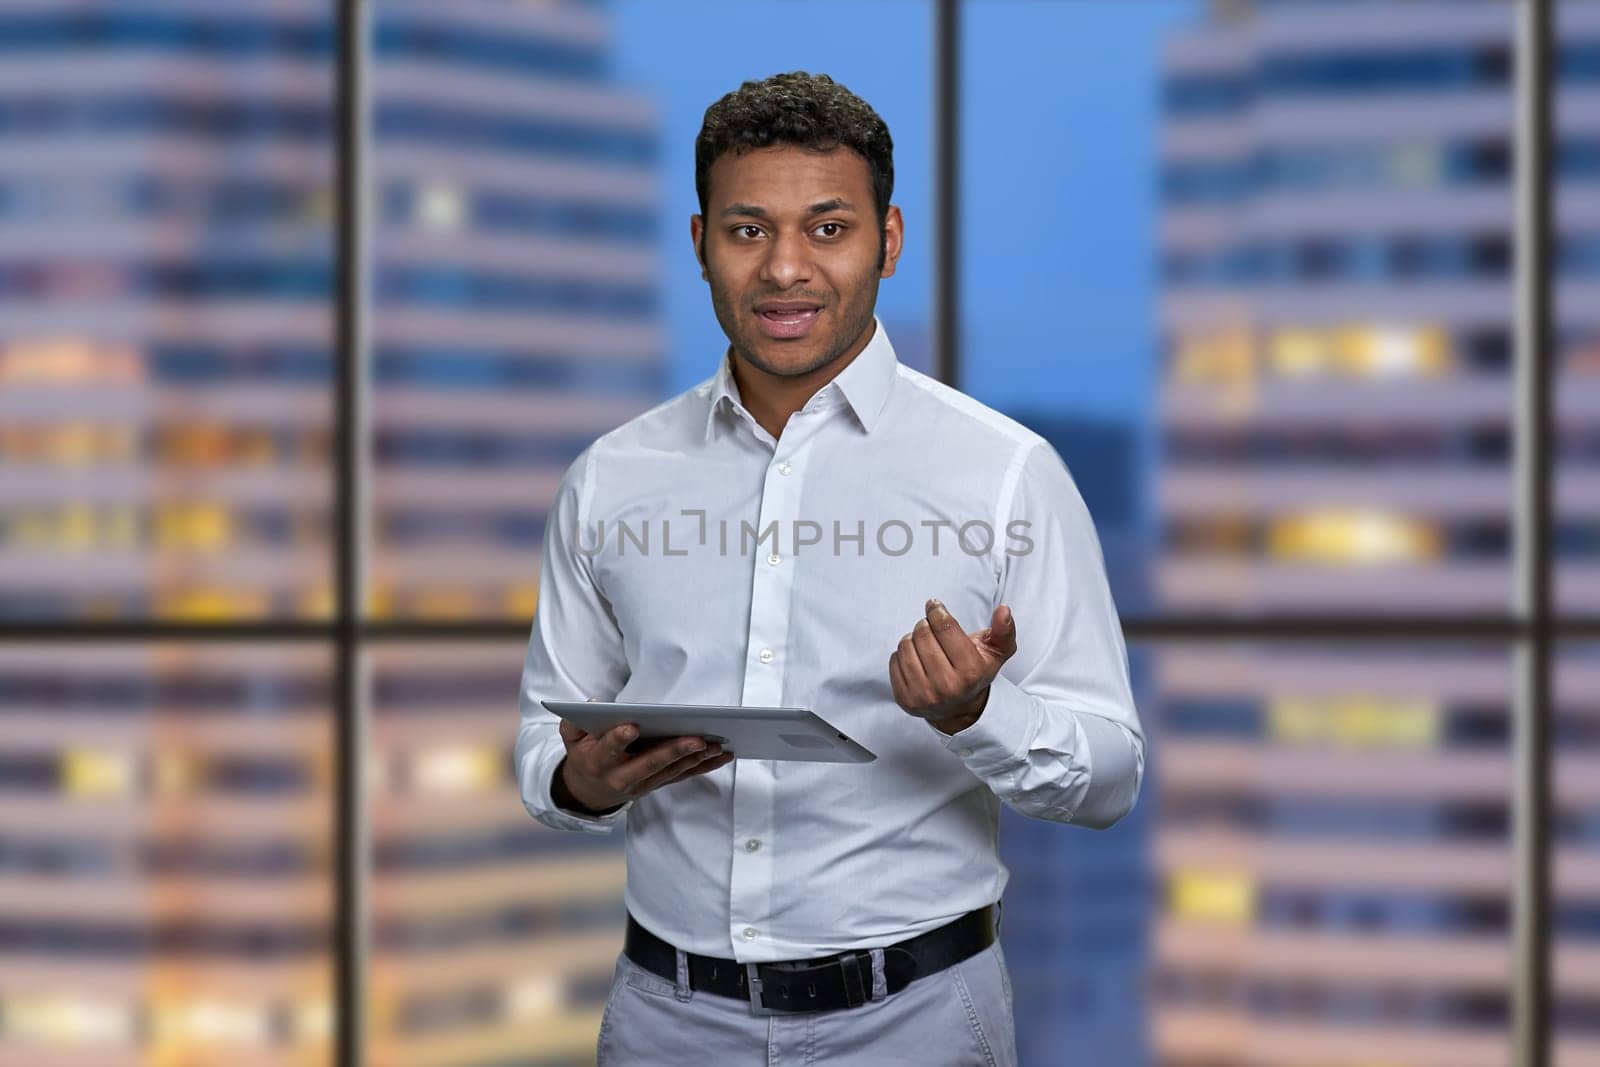 Young Indian business man giving a presentation using digital tablet. City night background inside office.